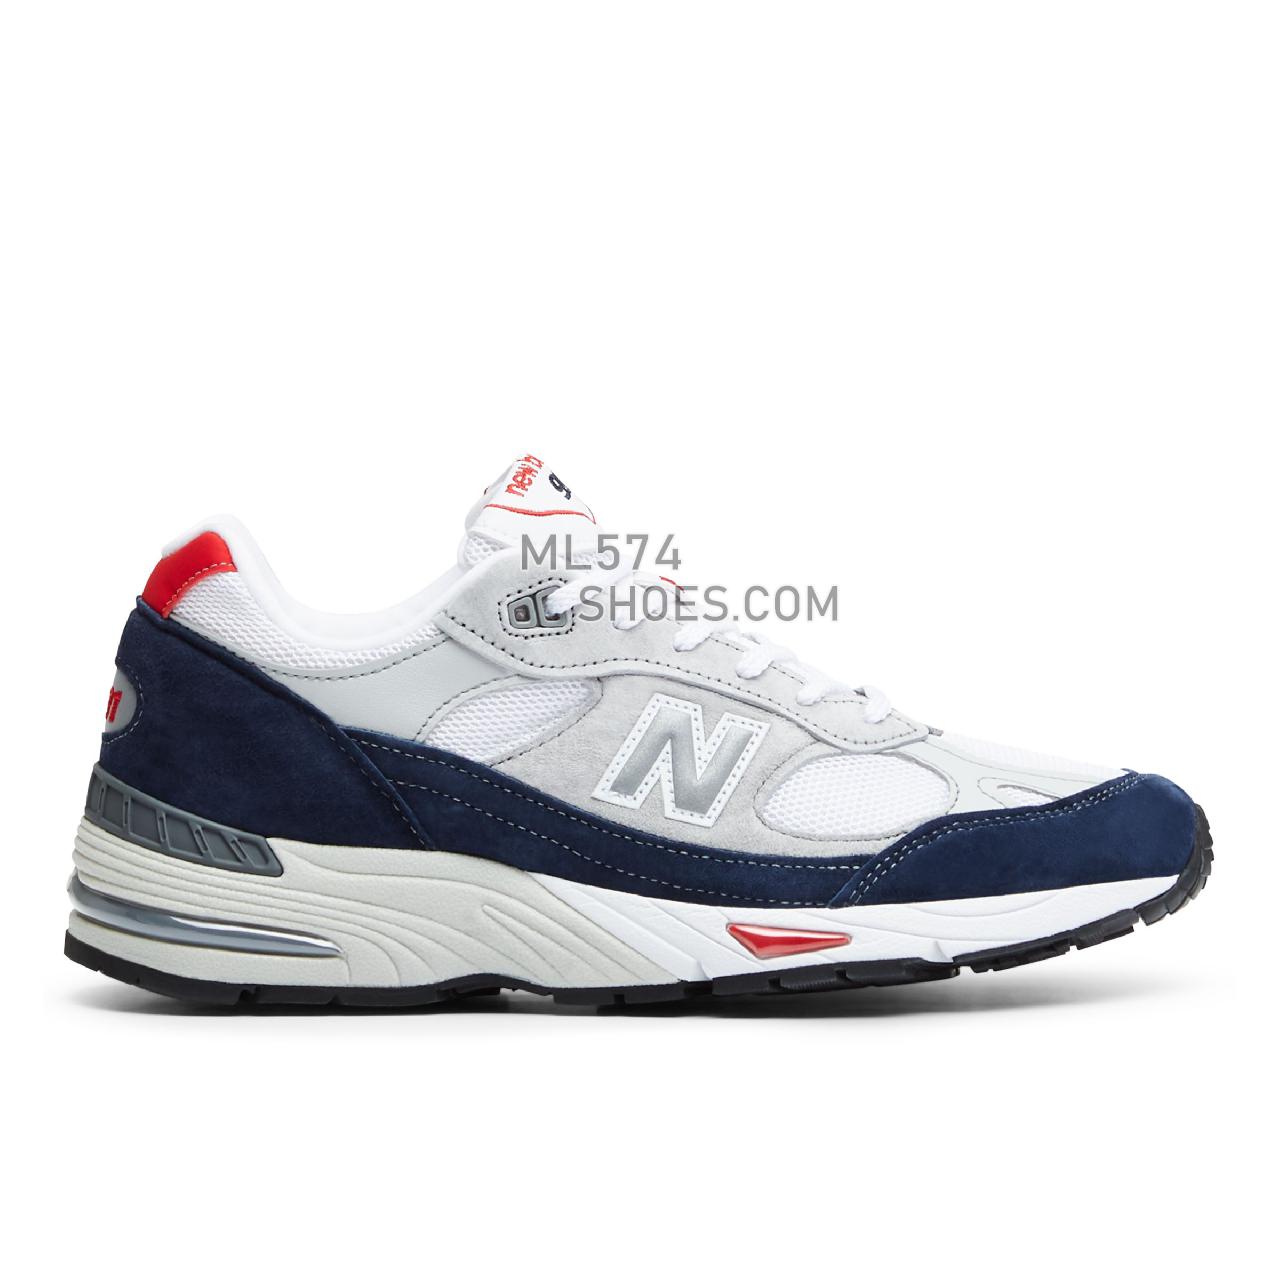 New Balance Made in UK 991 - Men's Made in USA And UK Sneakers - Blue with Grey and White - M991GWR